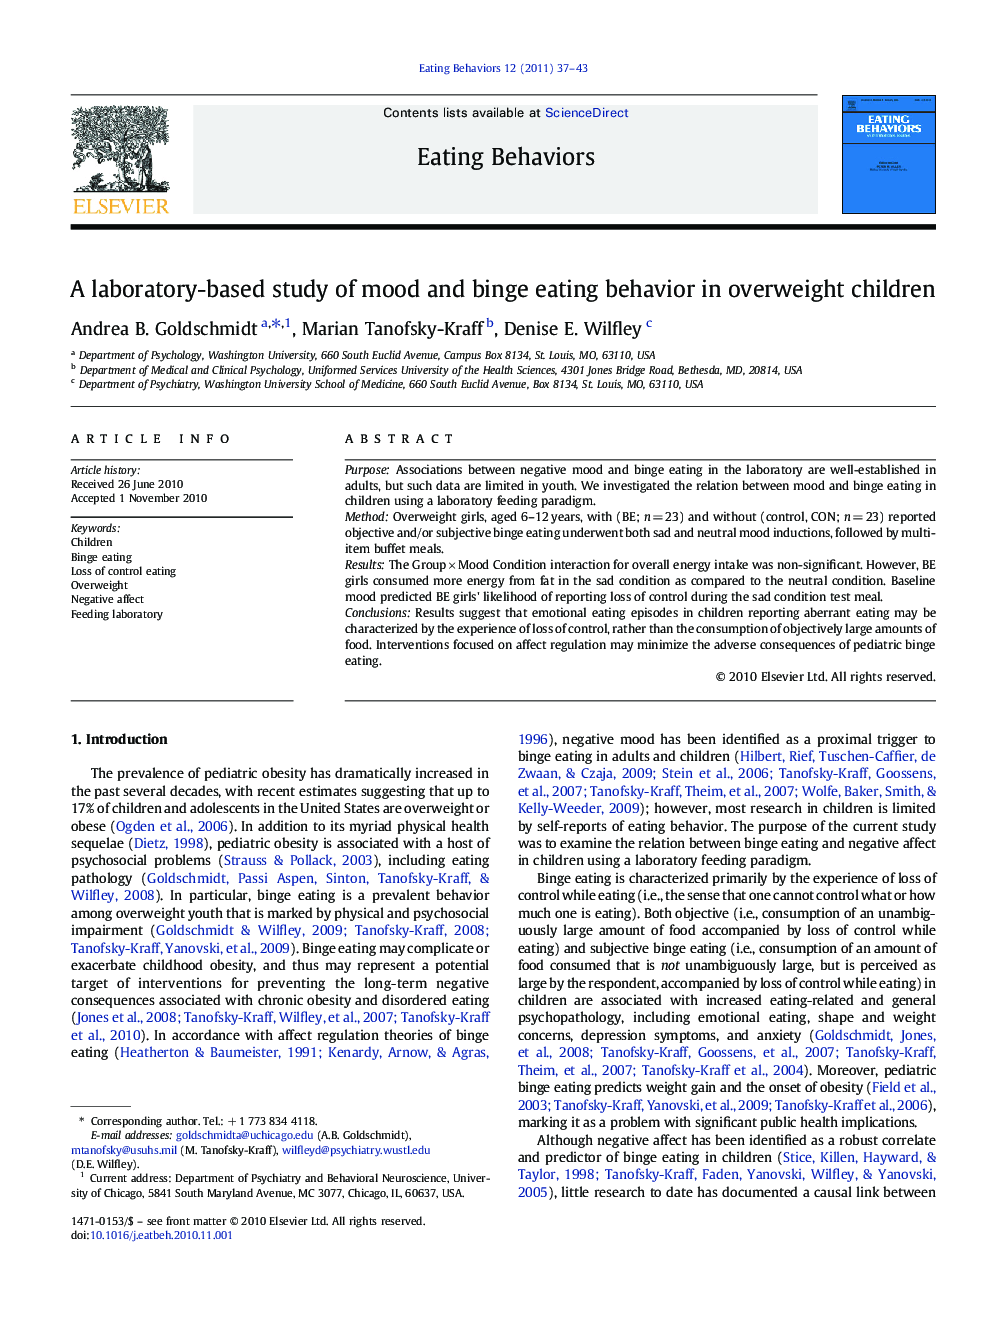 A laboratory-based study of mood and binge eating behavior in overweight children